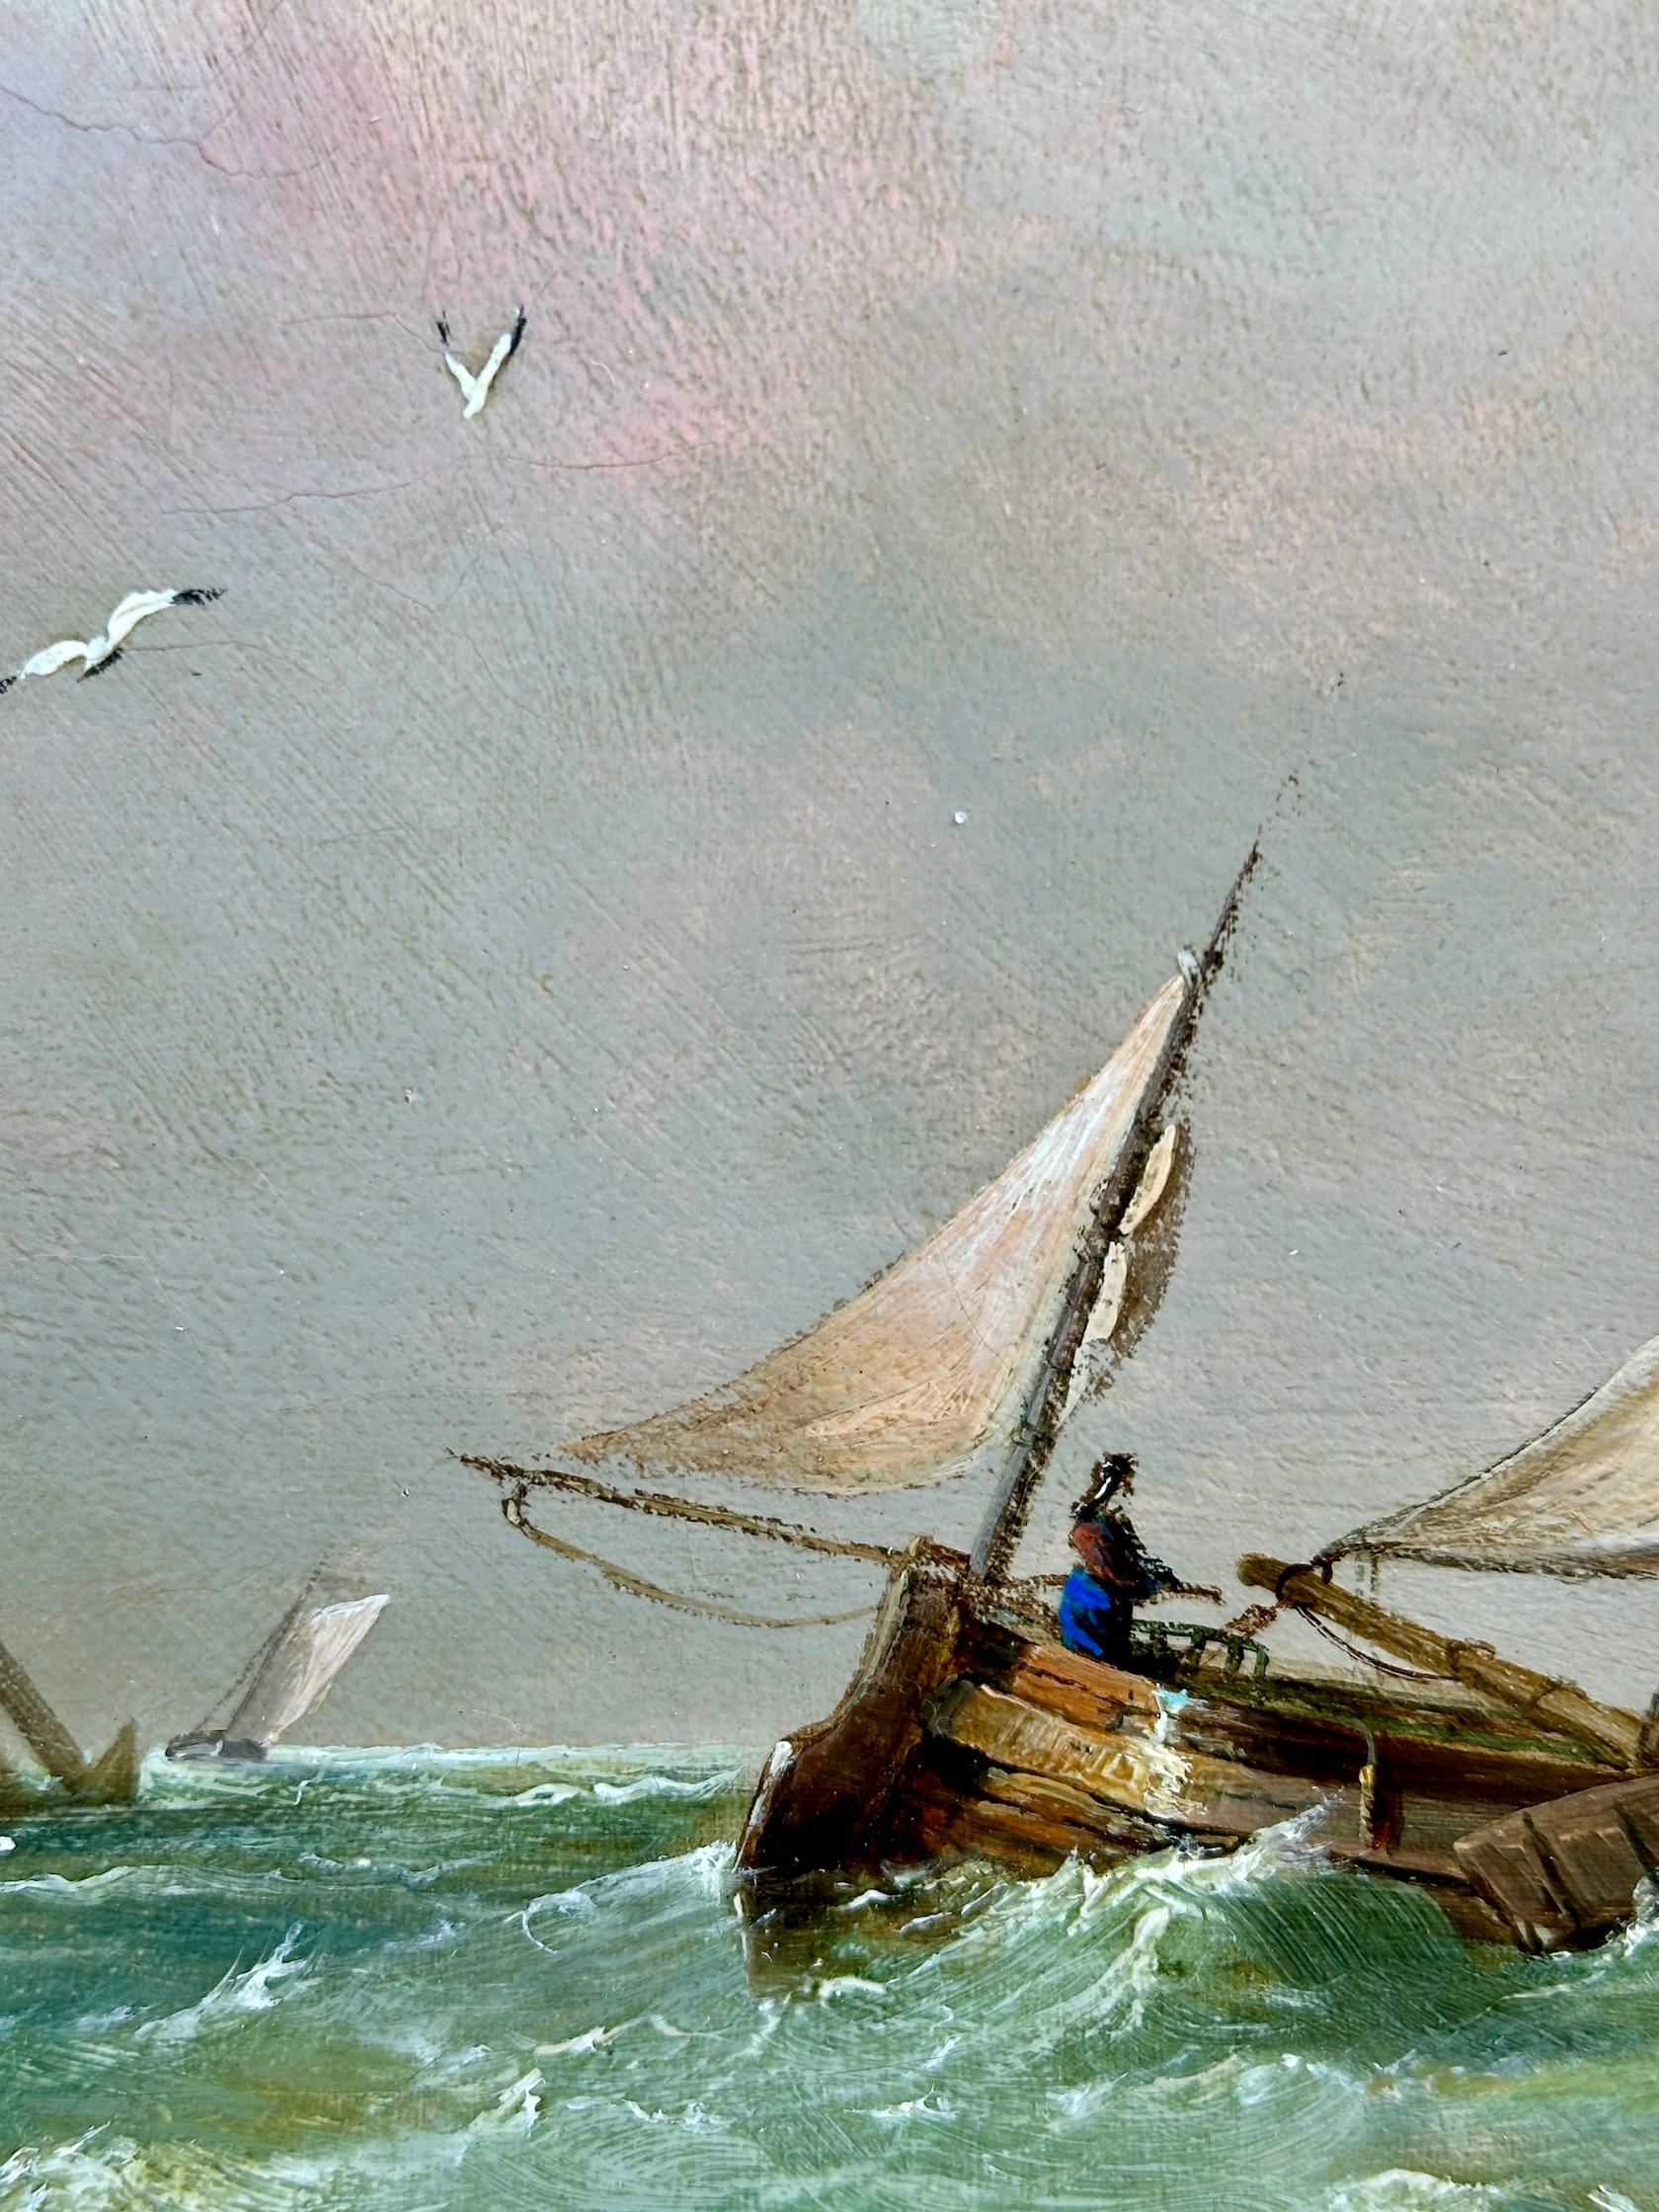 Henry King Taylor was a marine and coastal scene painter who lived in London. He exhibited at the Royal Academy from 1859 to 1864 with titles including ‘The Passing Storm’, ‘The Ramsgate Lifeboat’, and ‘Dutch Shipping’. He also exhibited at the